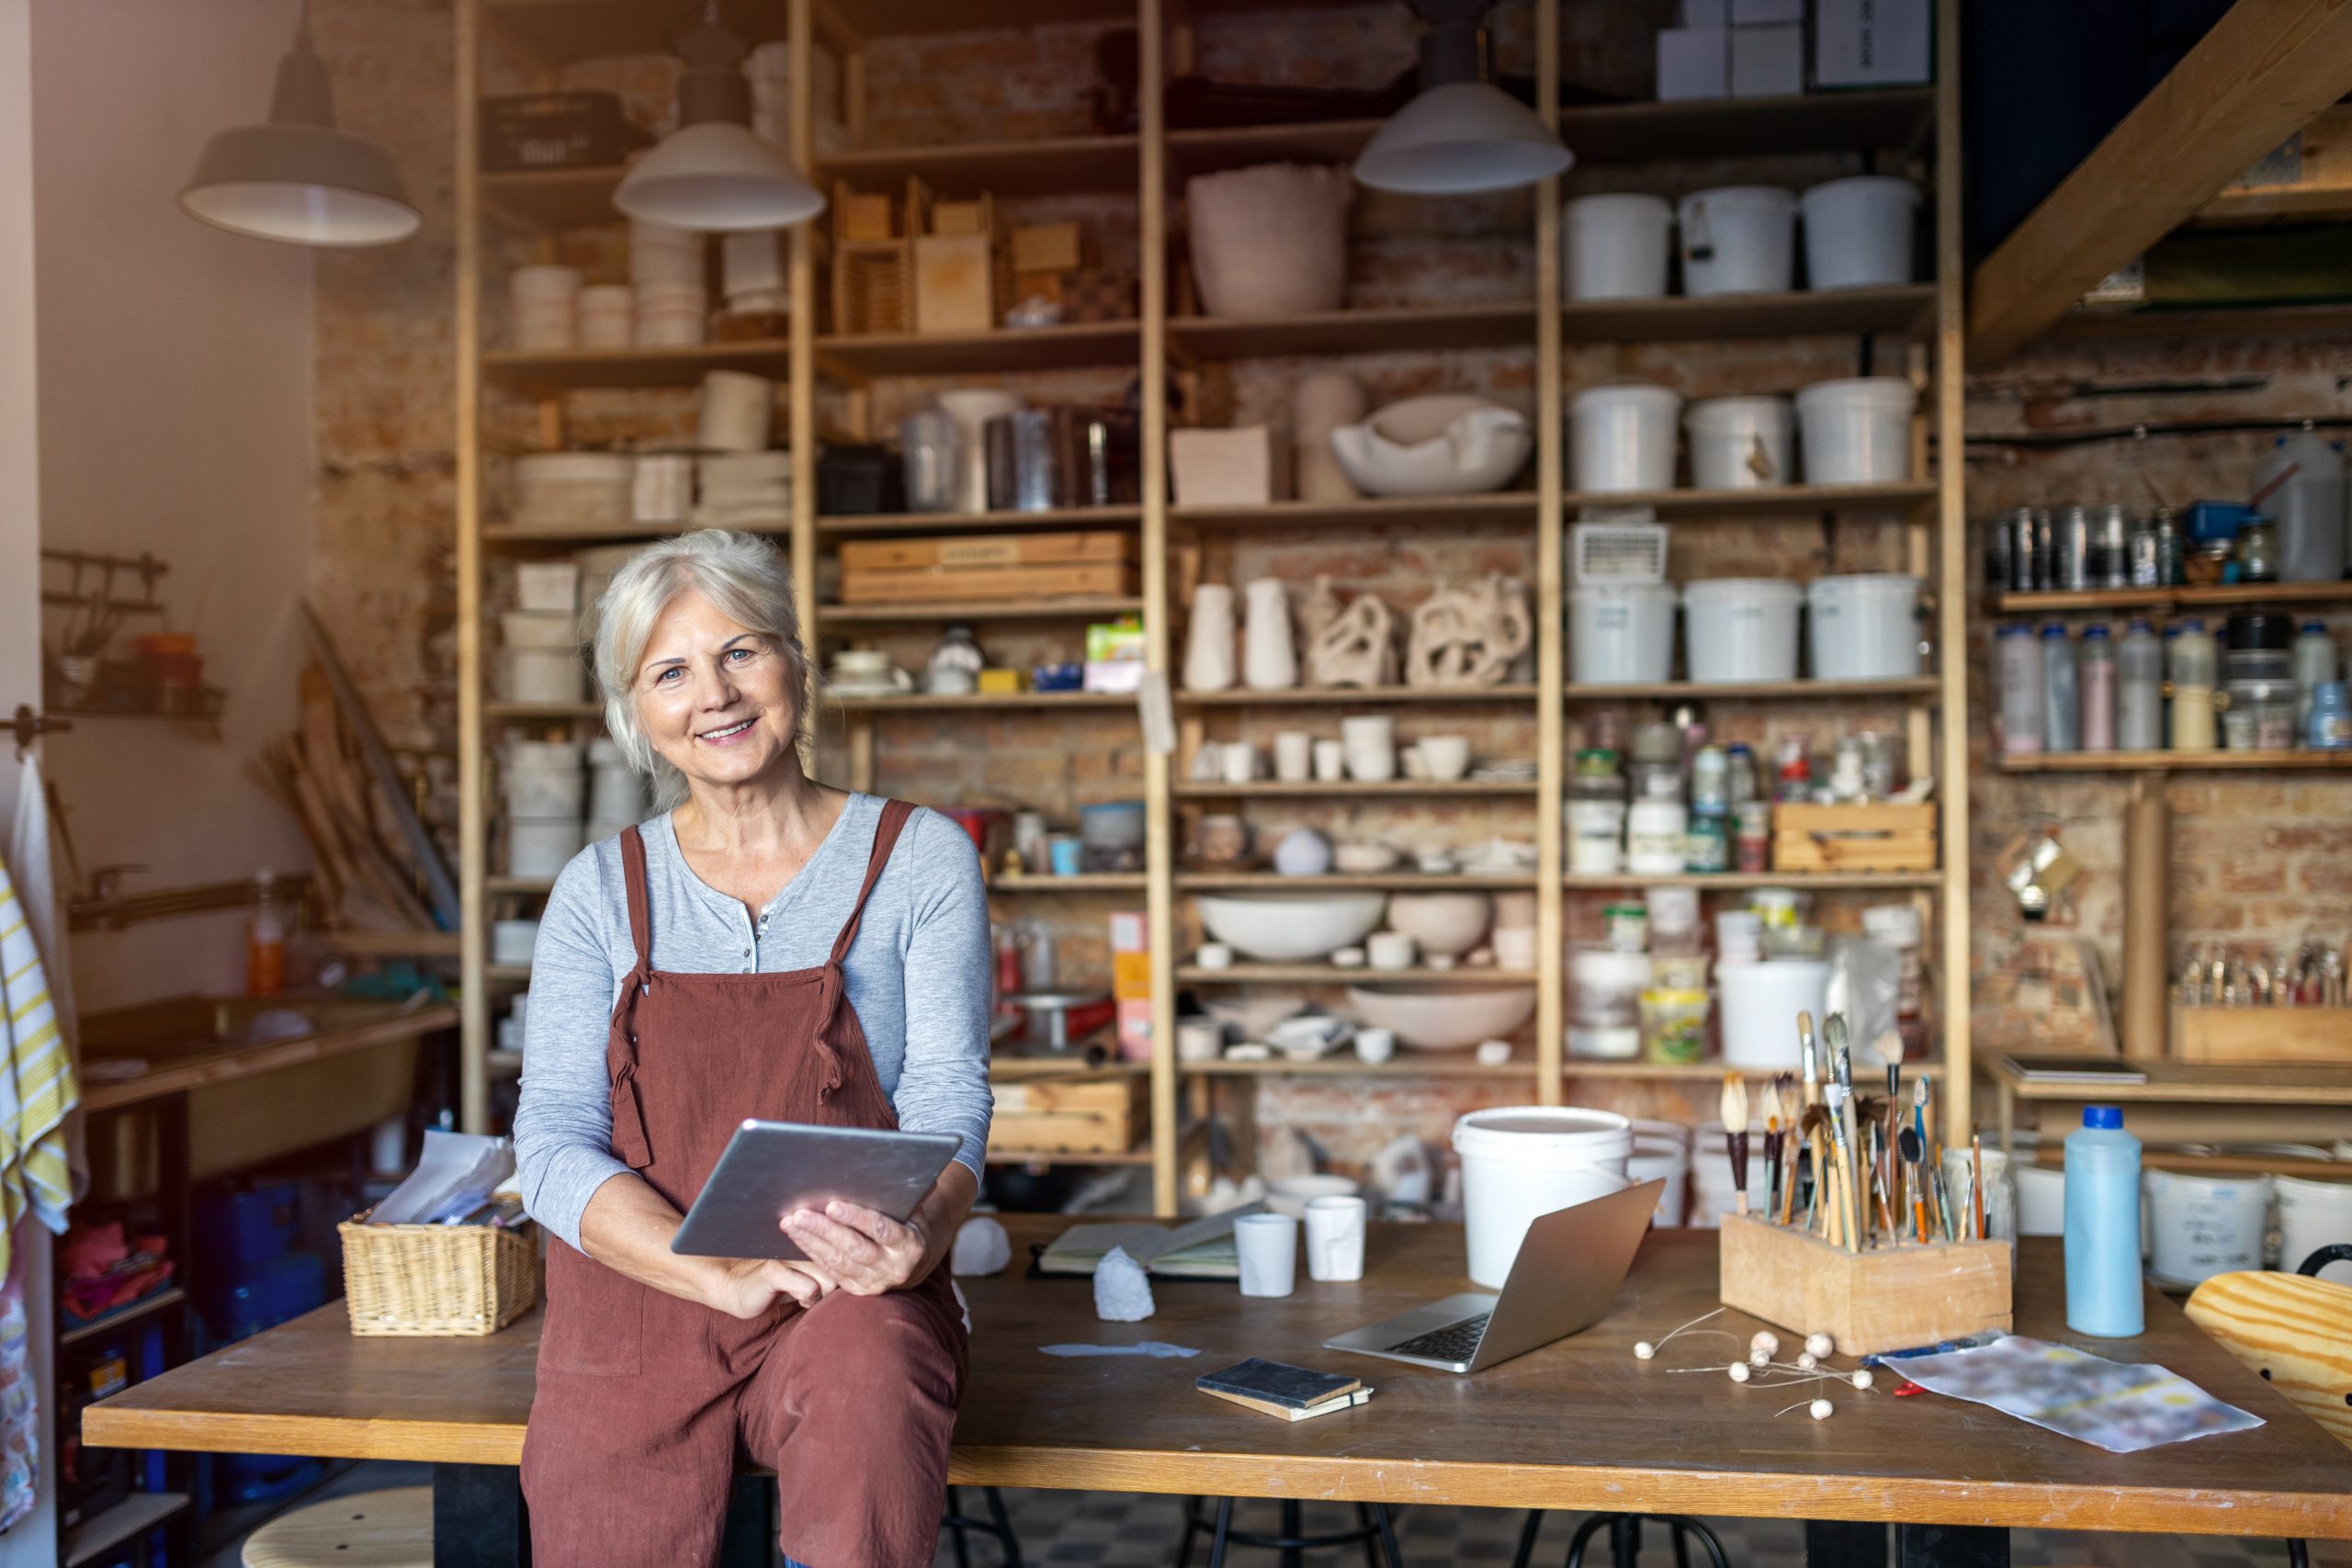 Older woman looks at the camera, leaning against her craft table with ceiling high shelves of pottery behind her